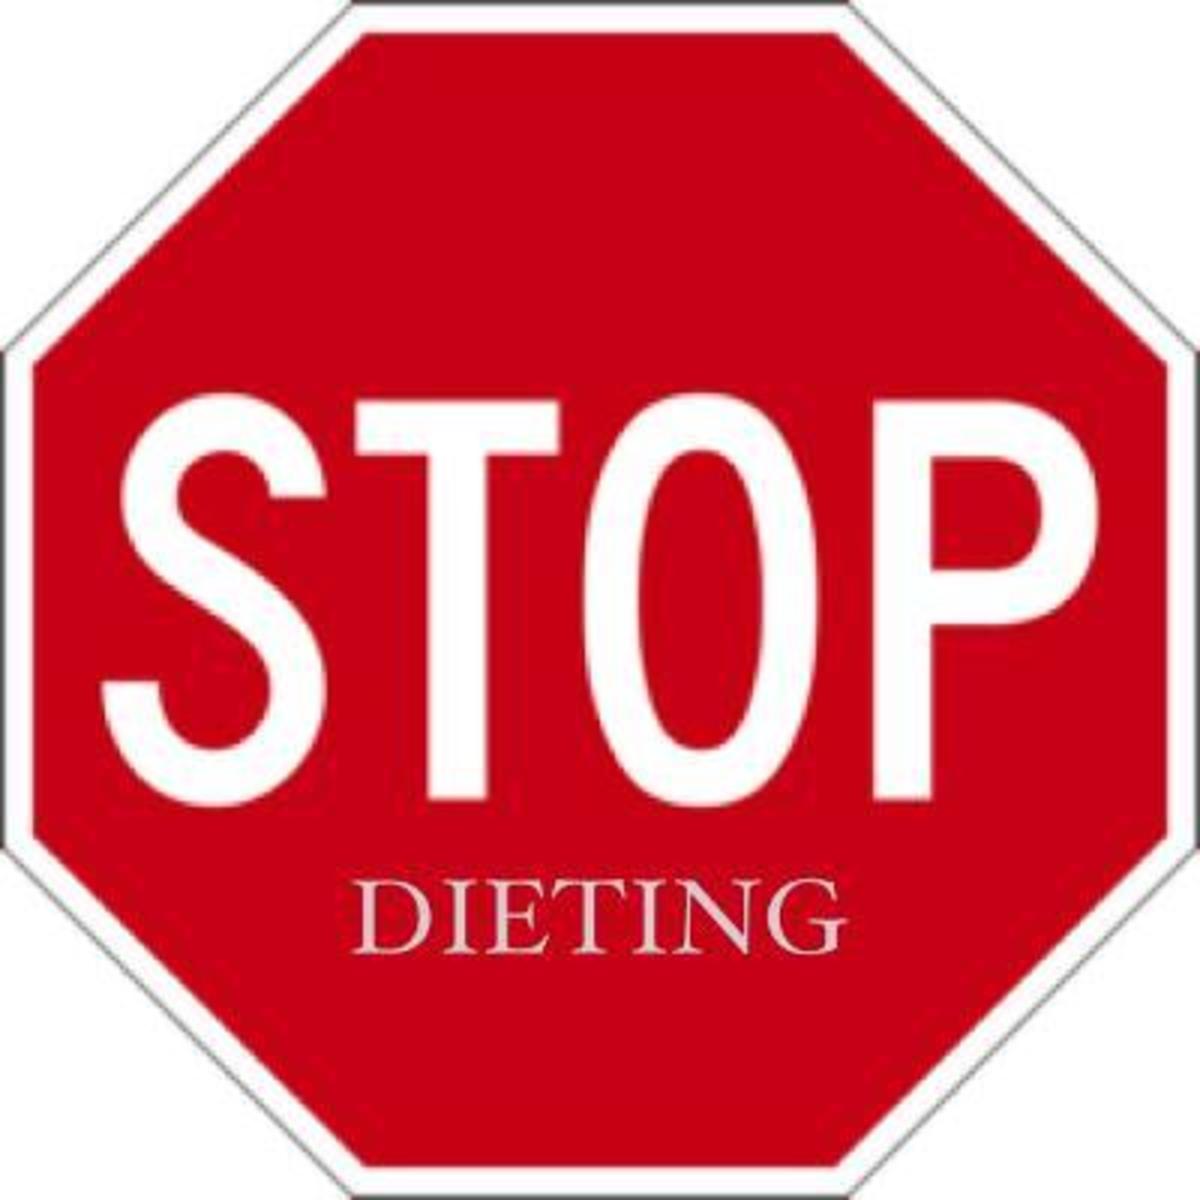 dieting-is-the-worst-way-to-lose-weight